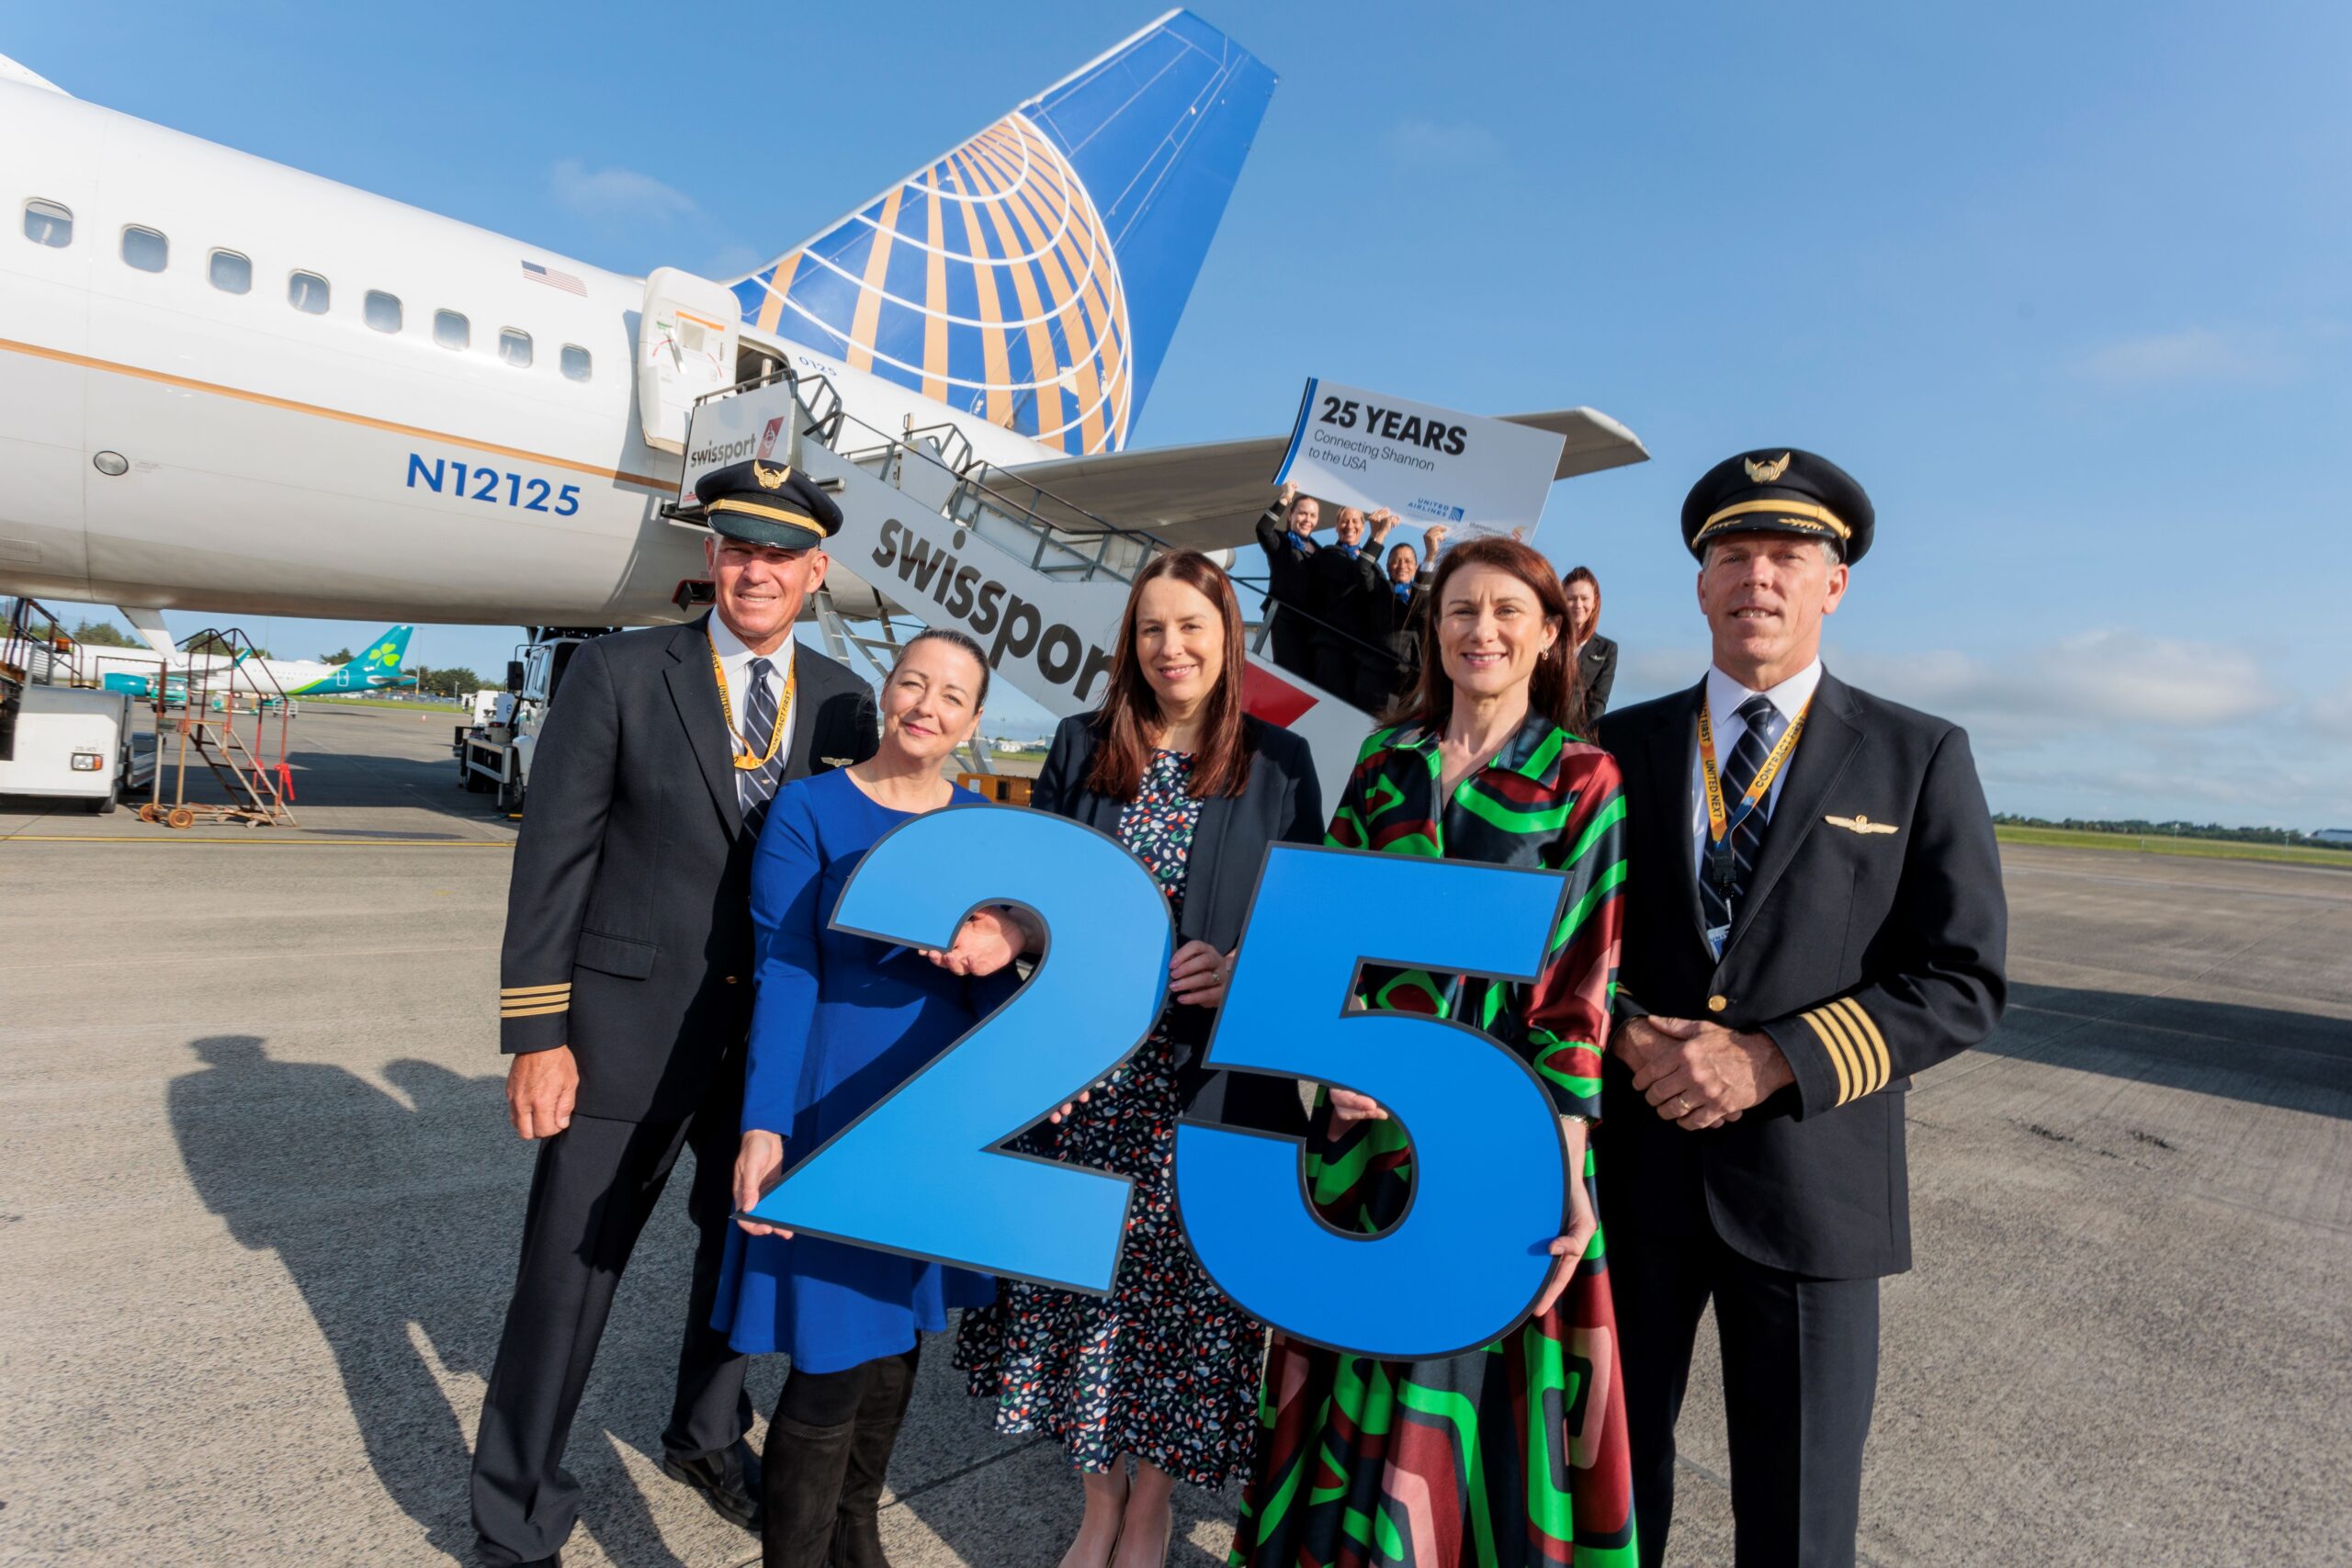 Shannon Airport and United Airlines marks 25th anniversary of New York/Newark Service